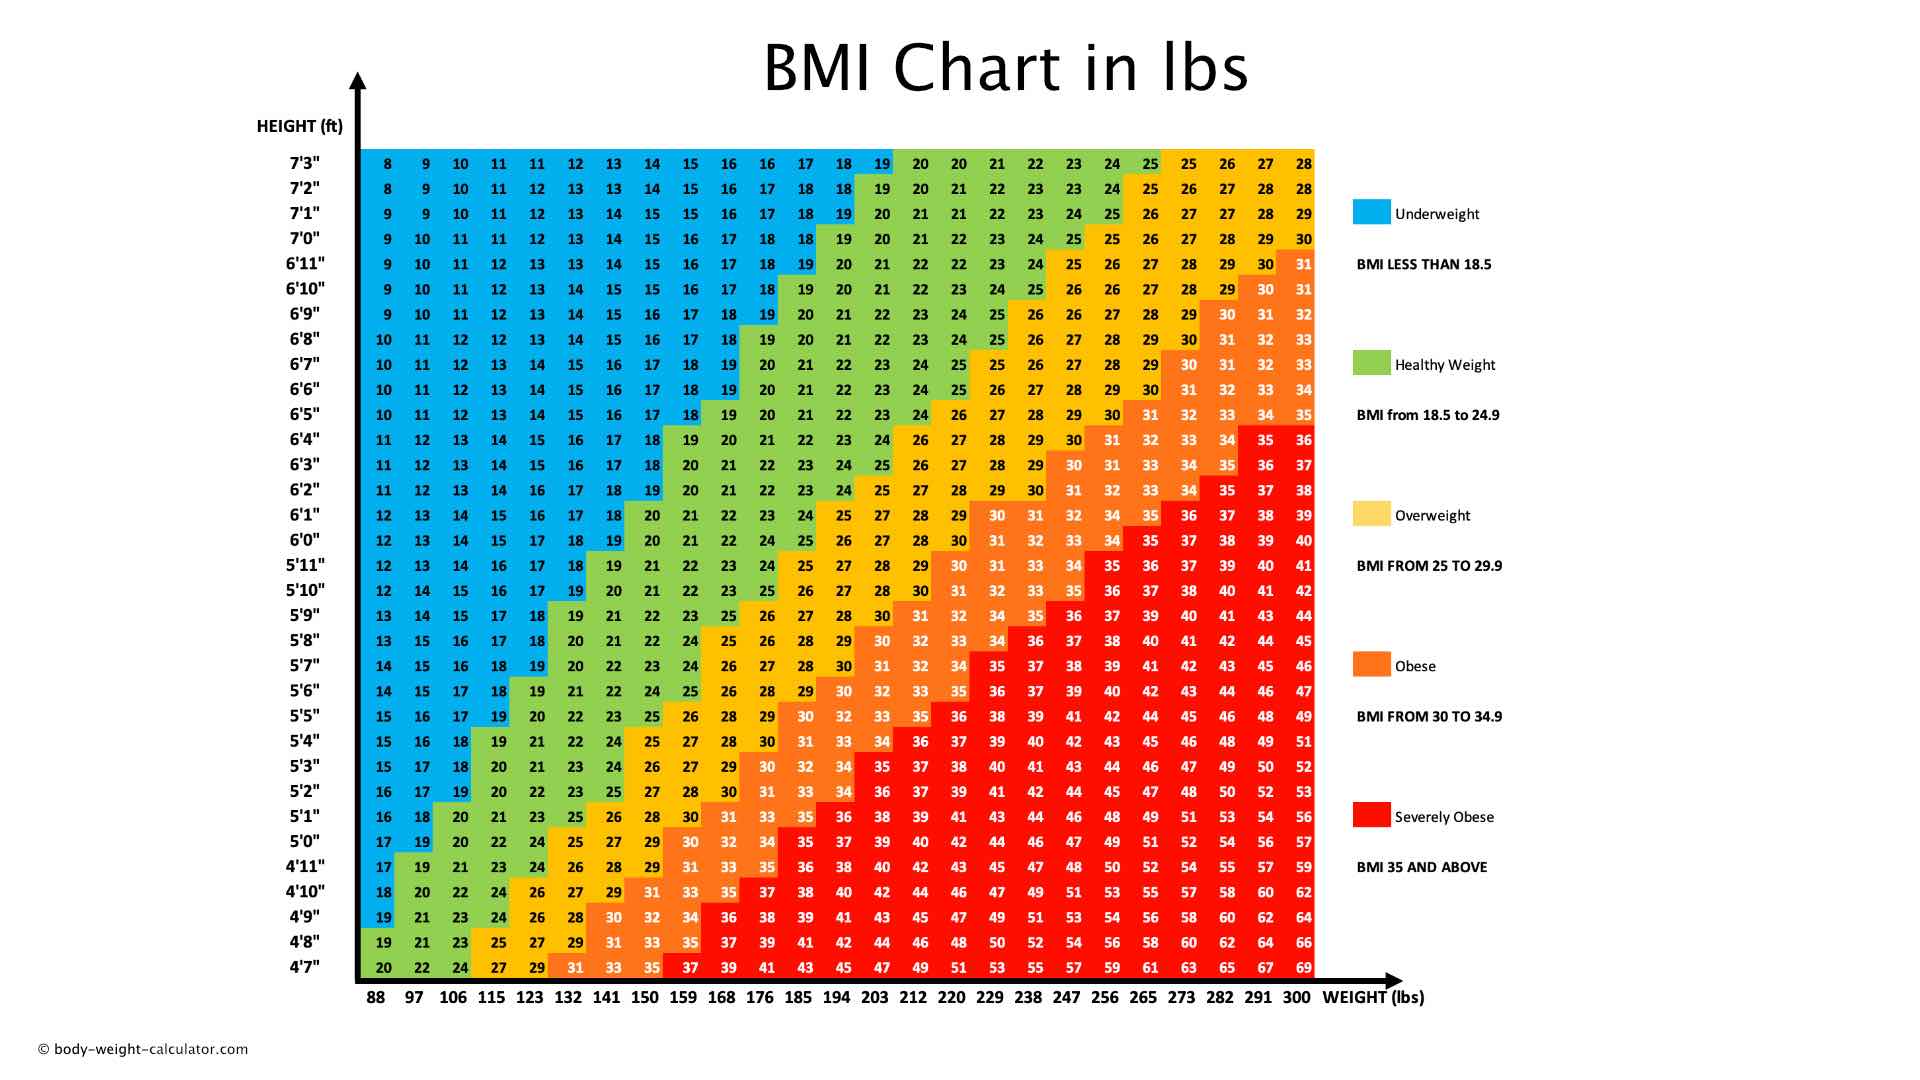 BMI chart by age in the United States